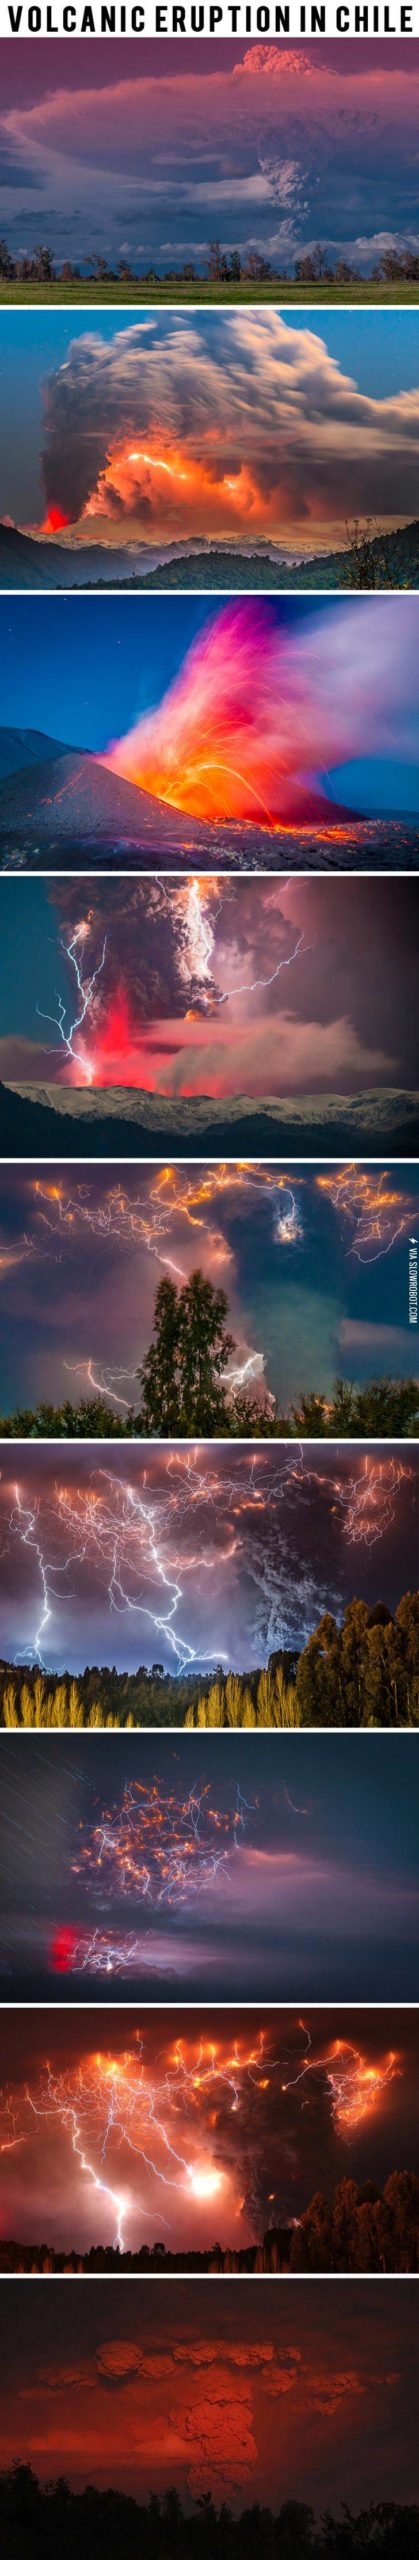 A+volcanic+eruption+in+Chile.